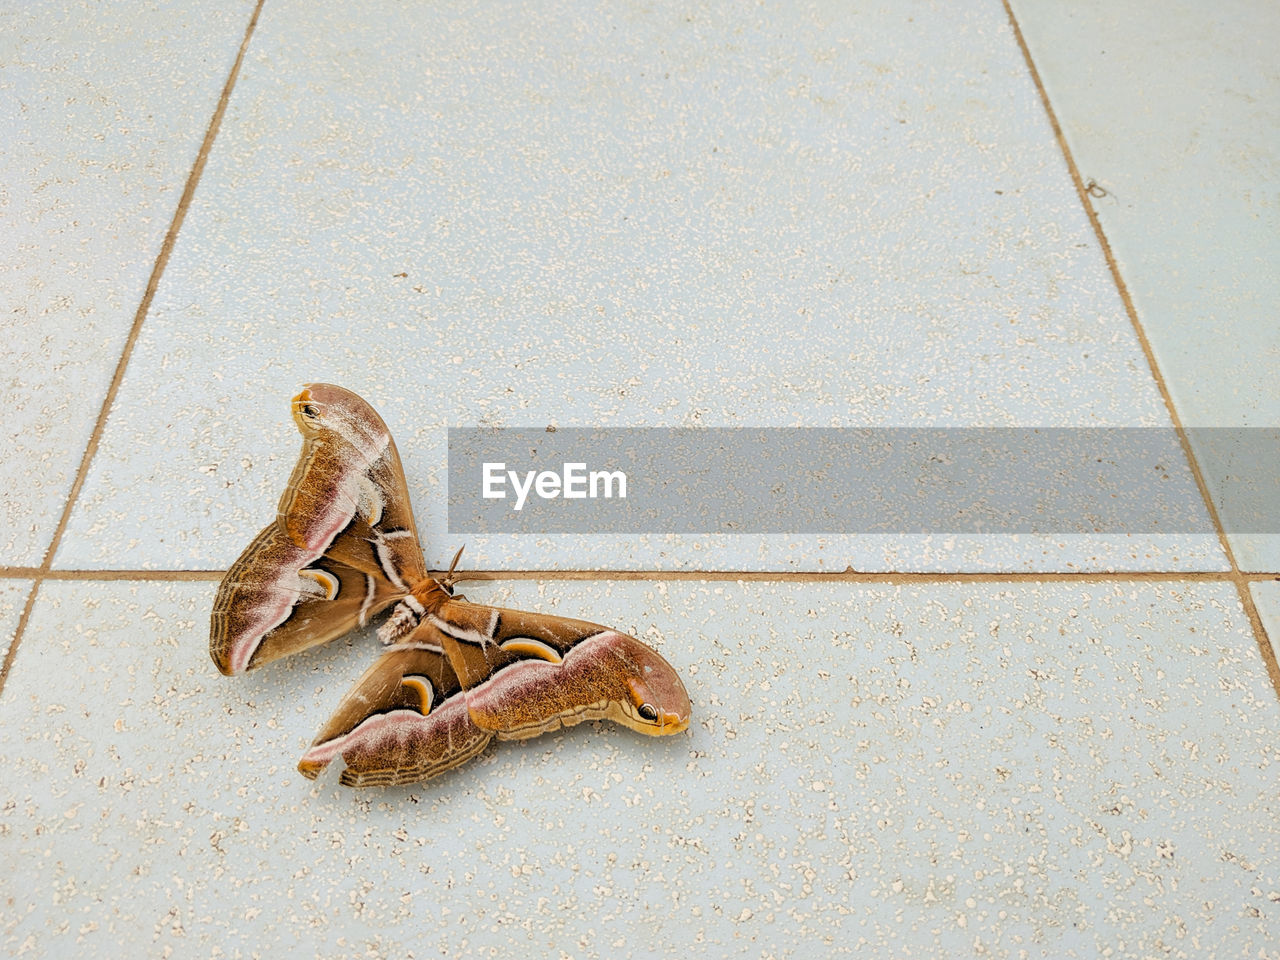 Close-up of brown butterfly on tiled floor